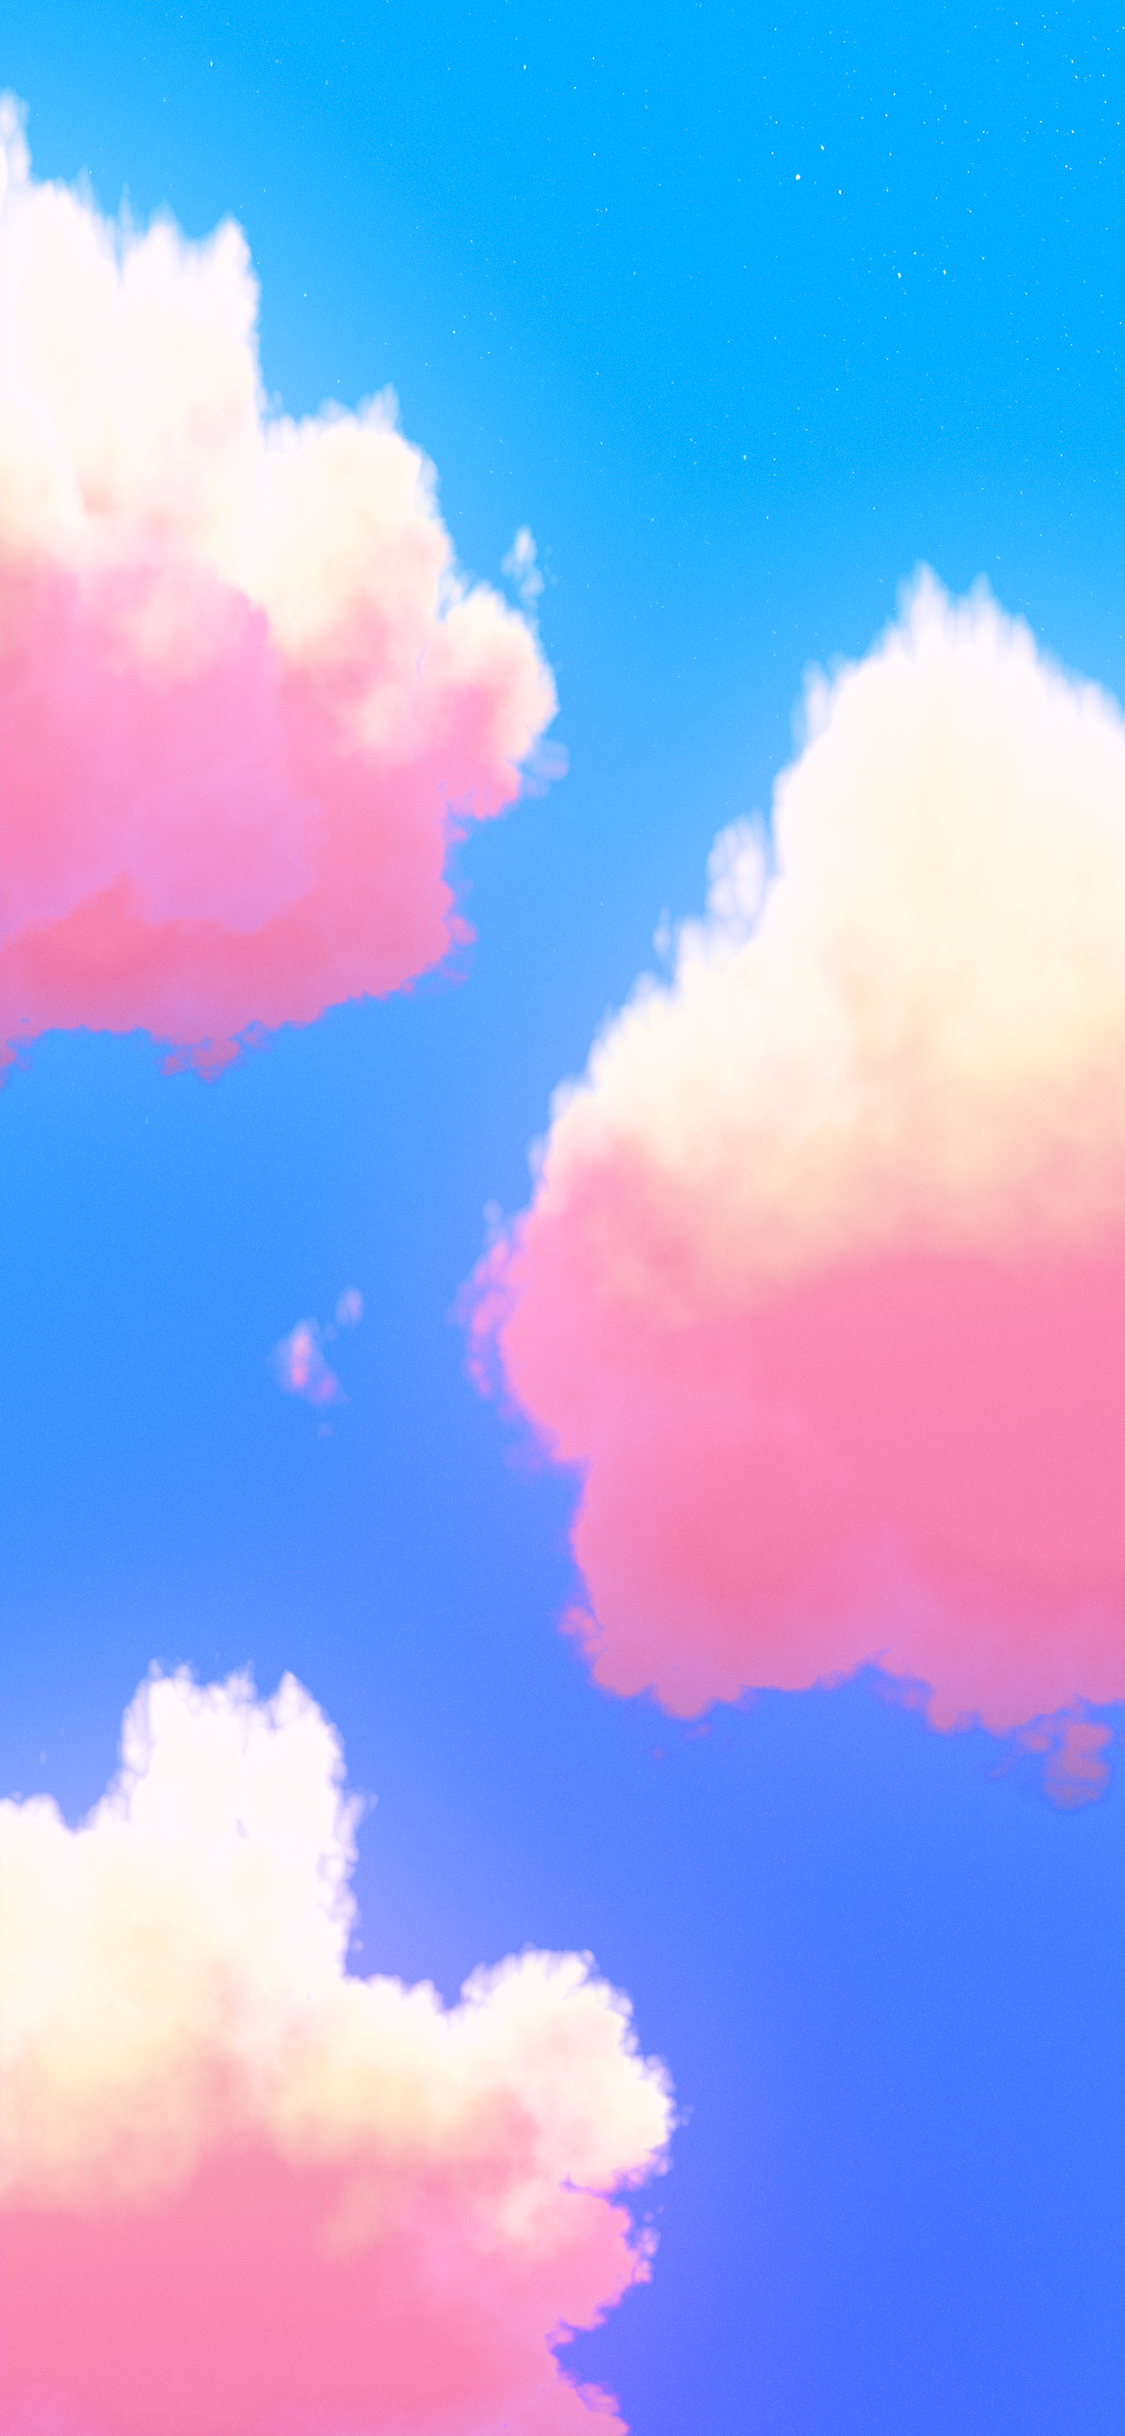 Fantasy cloud iPhone wallpaper from sunset to moonrise